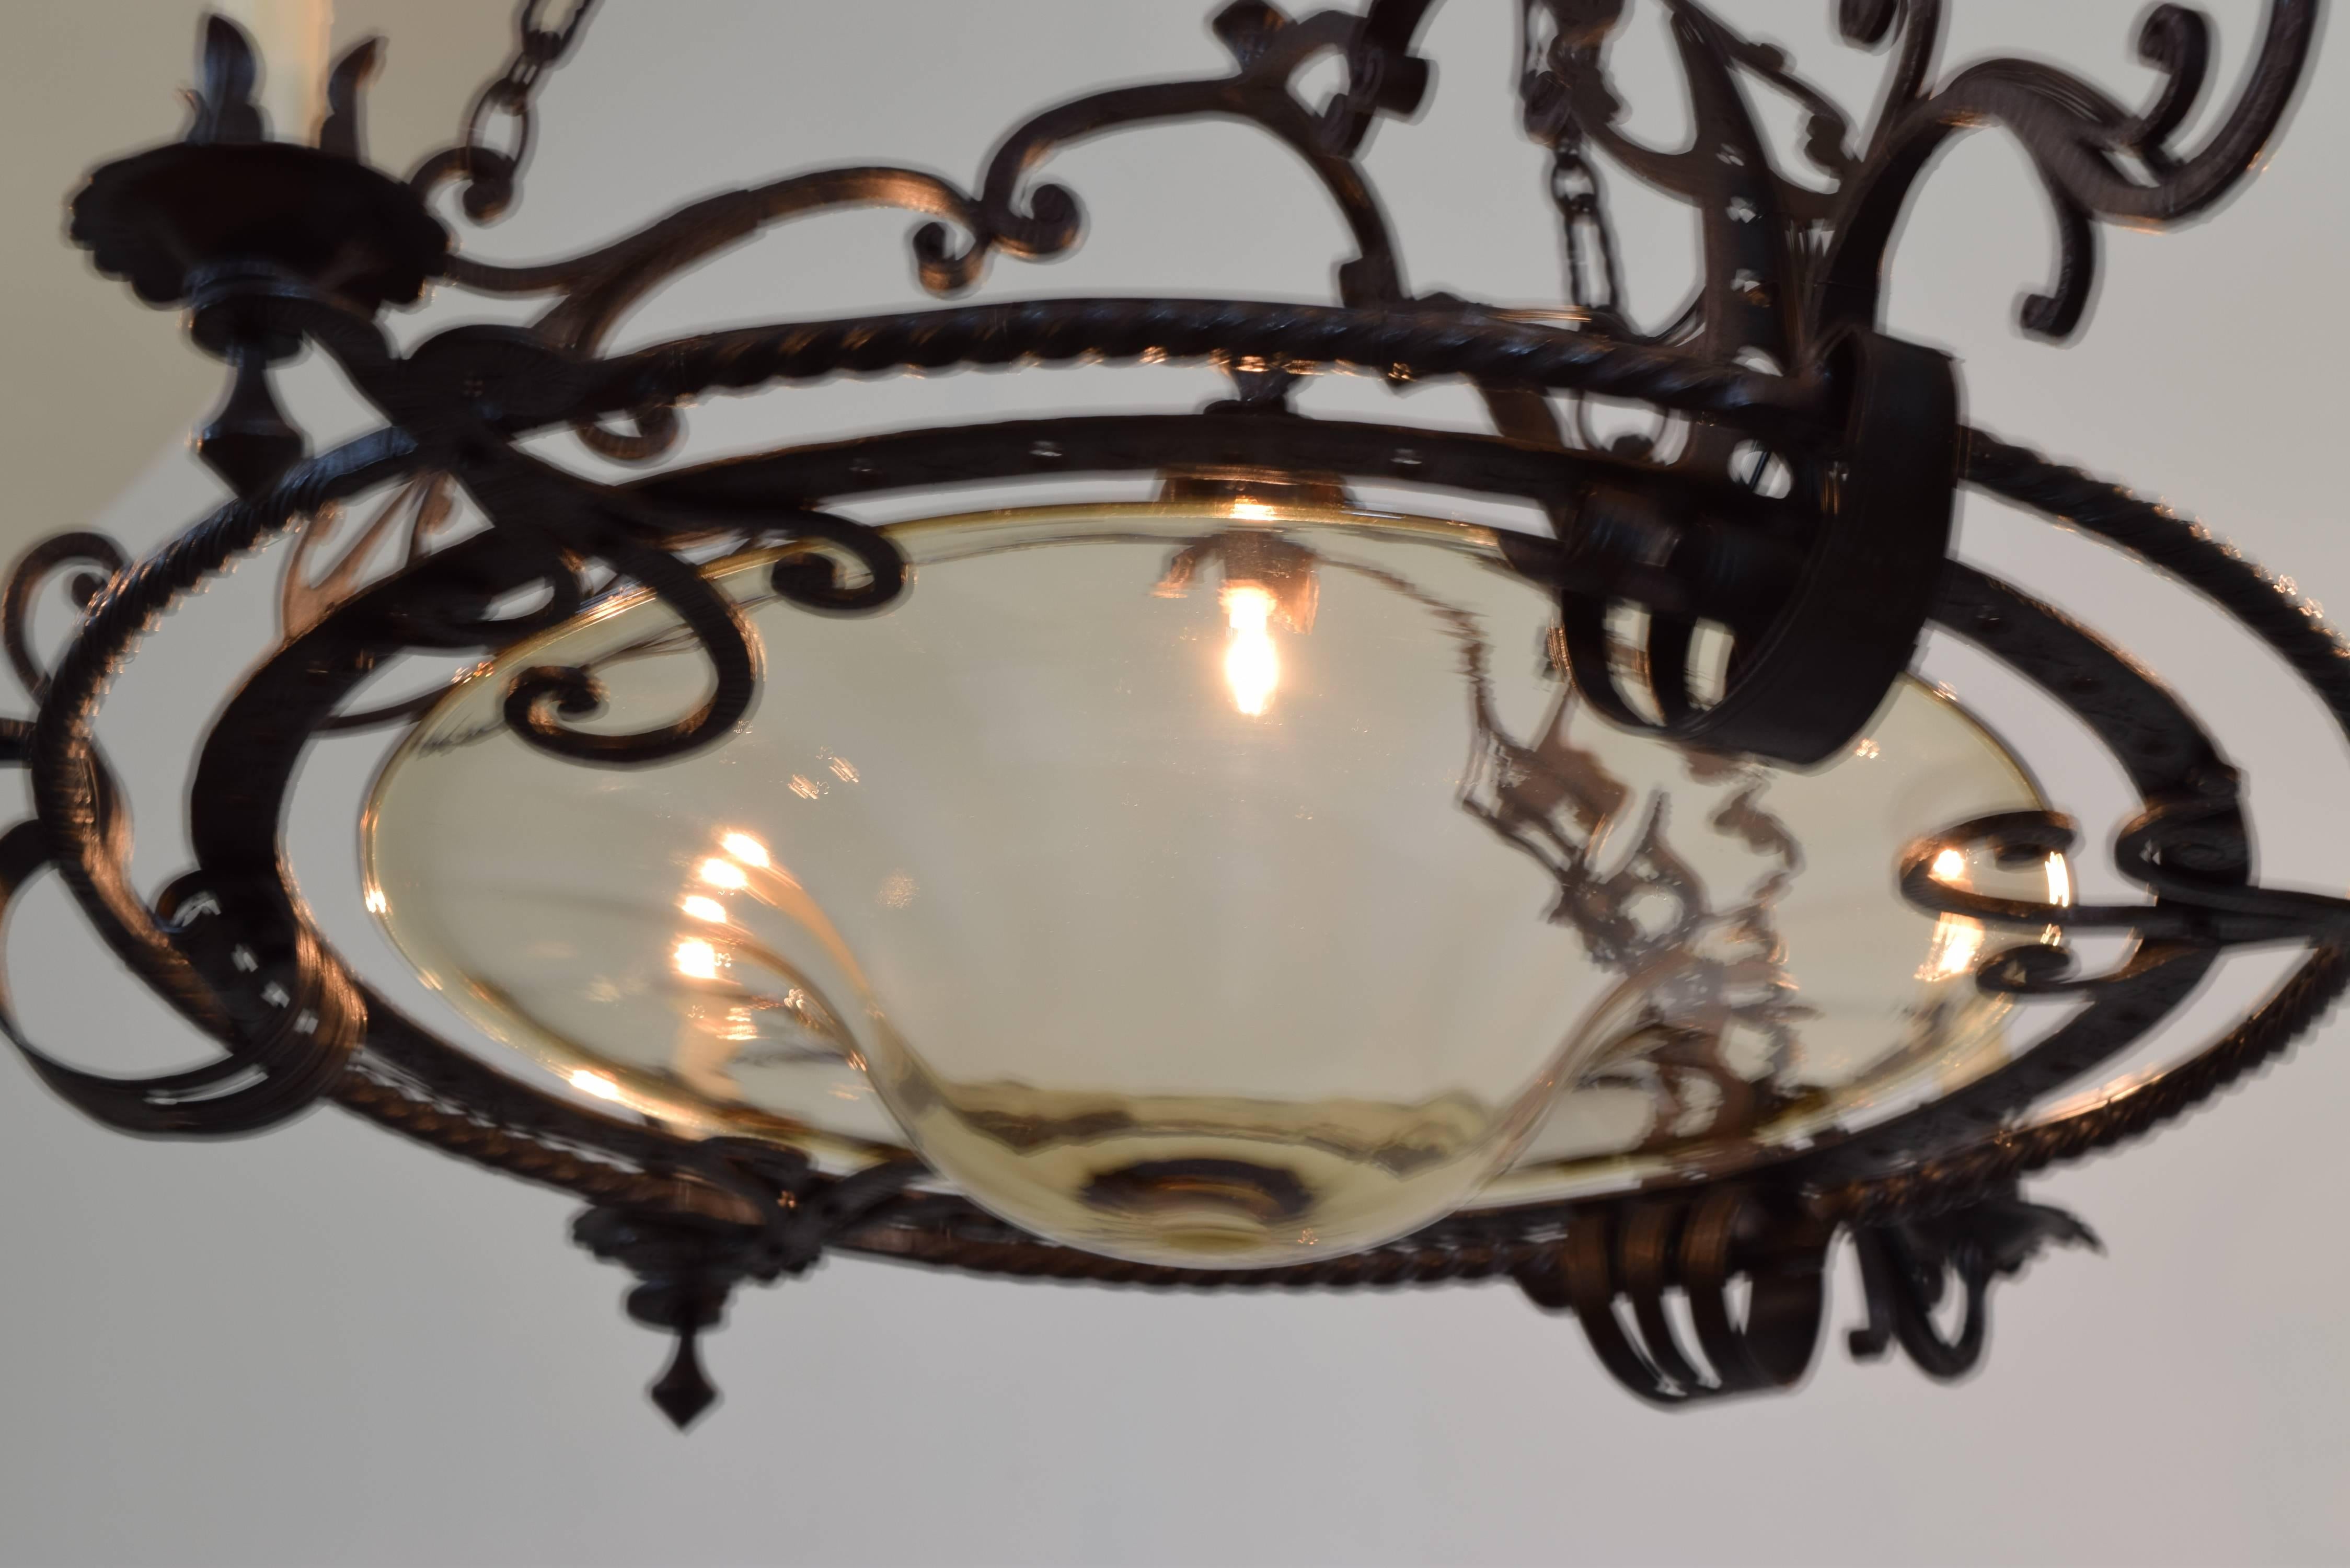 Italian Milanese Masterfully Wrought Iron Seven-Light Chandelier, Early 20th Century